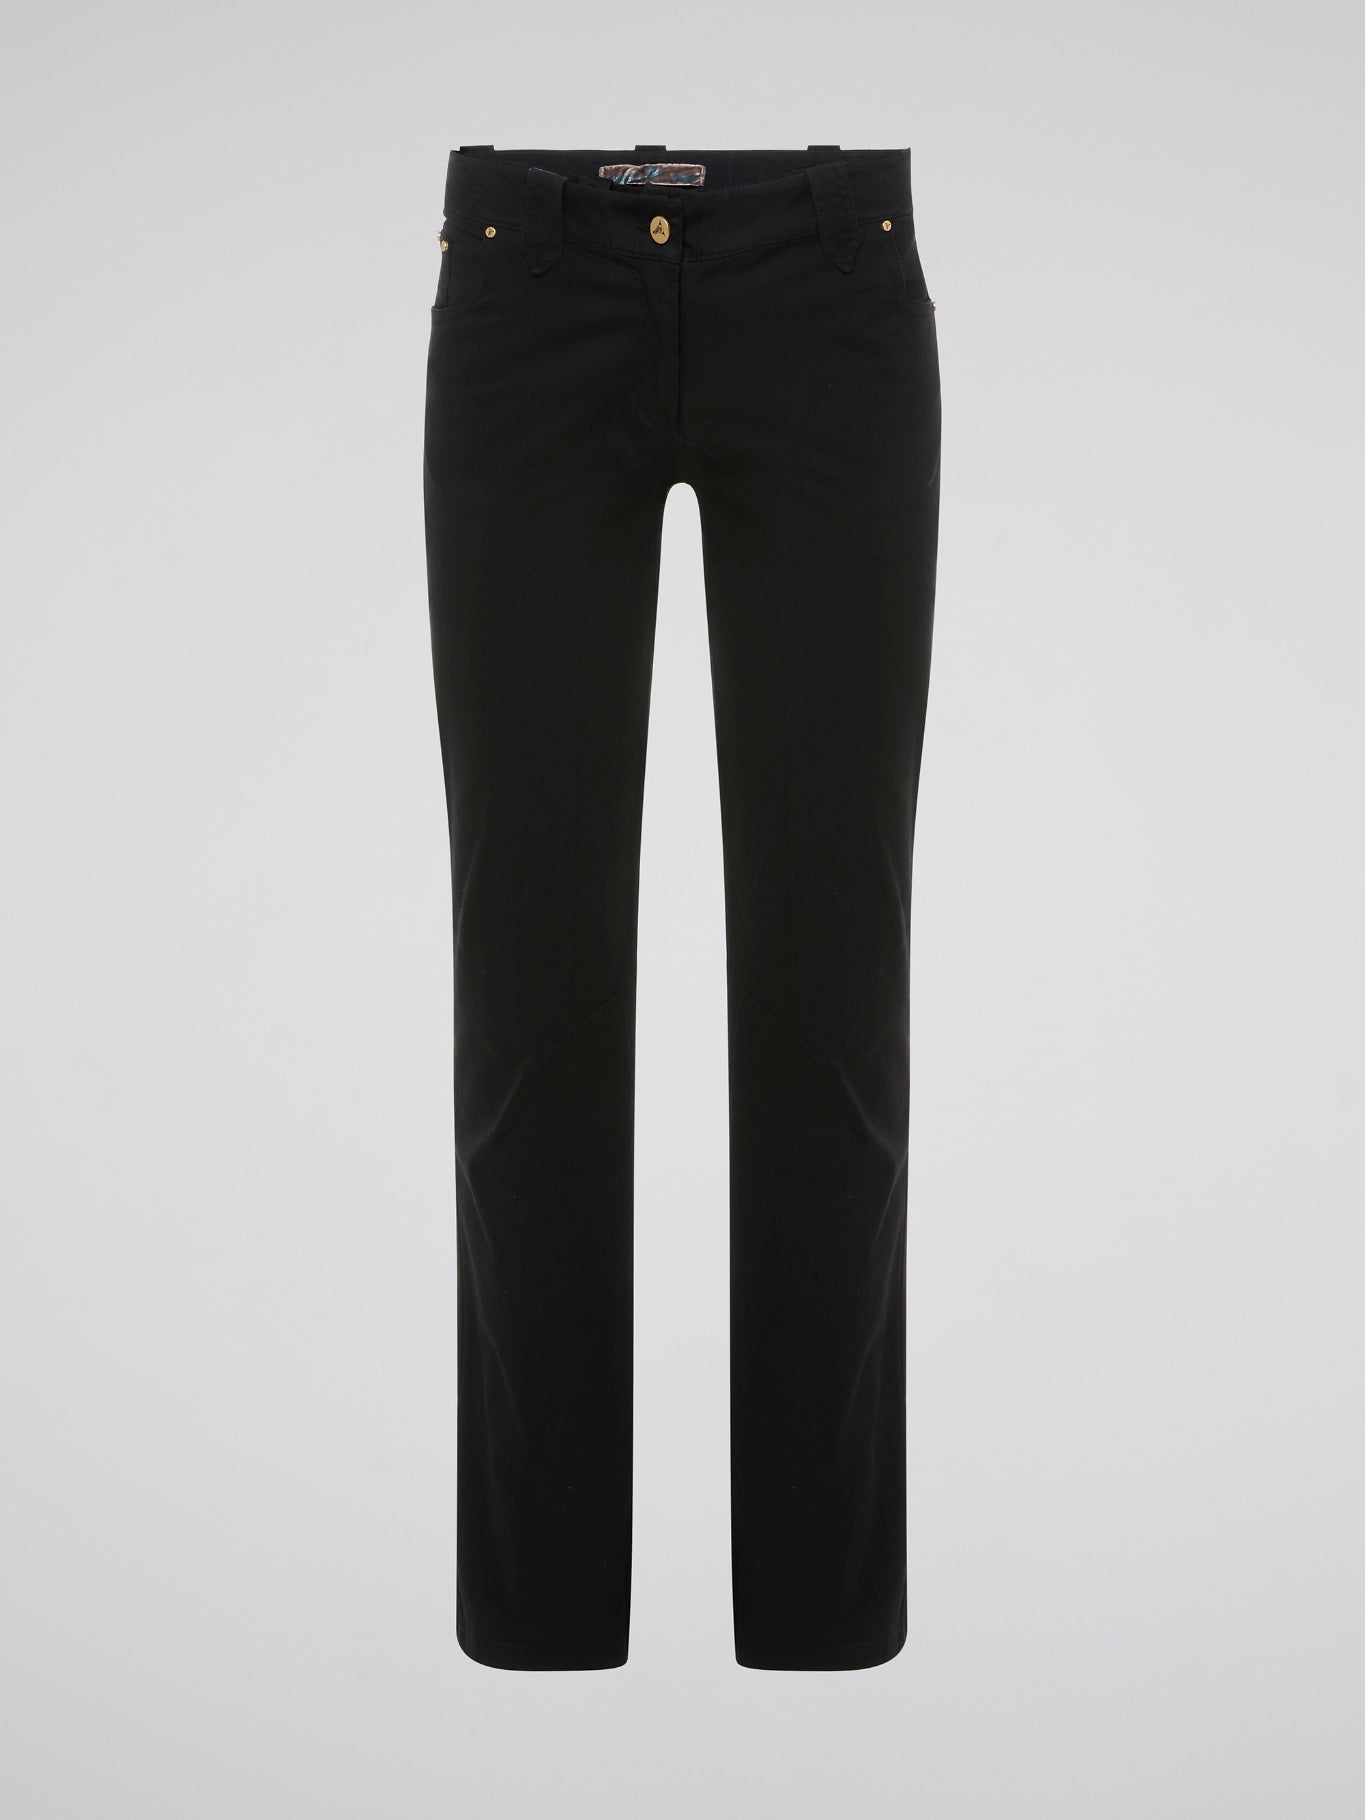 Step out in style with our Black Studded Straight Leg JeansLt By Voyage, featuring edgy studded detailing that will add a touch of rockstar glamour to any outfit. These jeans are made with a comfortable design and a flattering straight leg fit, making them perfect for both casual and dressed-up looks. Elevate your wardrobe with these unique, statement-making jeans that are sure to turn heads wherever you go.